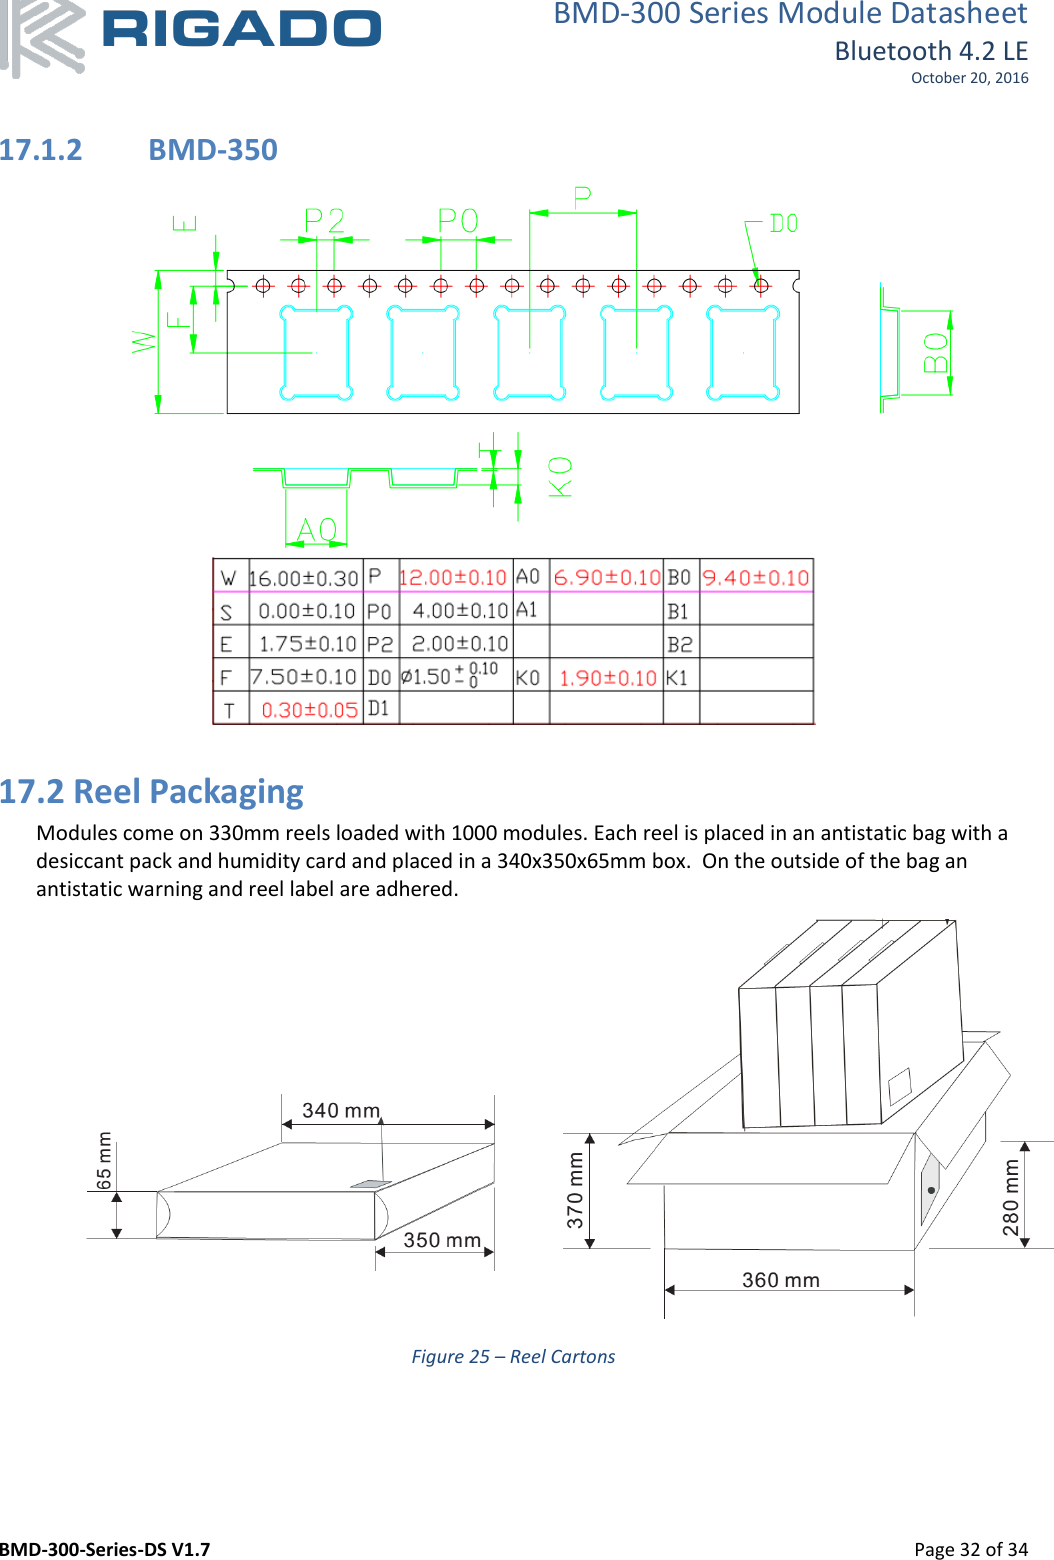 BMD-300 Series Module Datasheet Bluetooth 4.2 LE October 20, 2016 BMD-300-Series-DS V1.7         Page 32 of 34  17.1.2 BMD-350    17.2 Reel Packaging Modules come on 330mm reels loaded with 1000 modules. Each reel is placed in an antistatic bag with a desiccant pack and humidity card and placed in a 340x350x65mm box.  On the outside of the bag an antistatic warning and reel label are adhered.  Figure 25 – Reel Cartons 